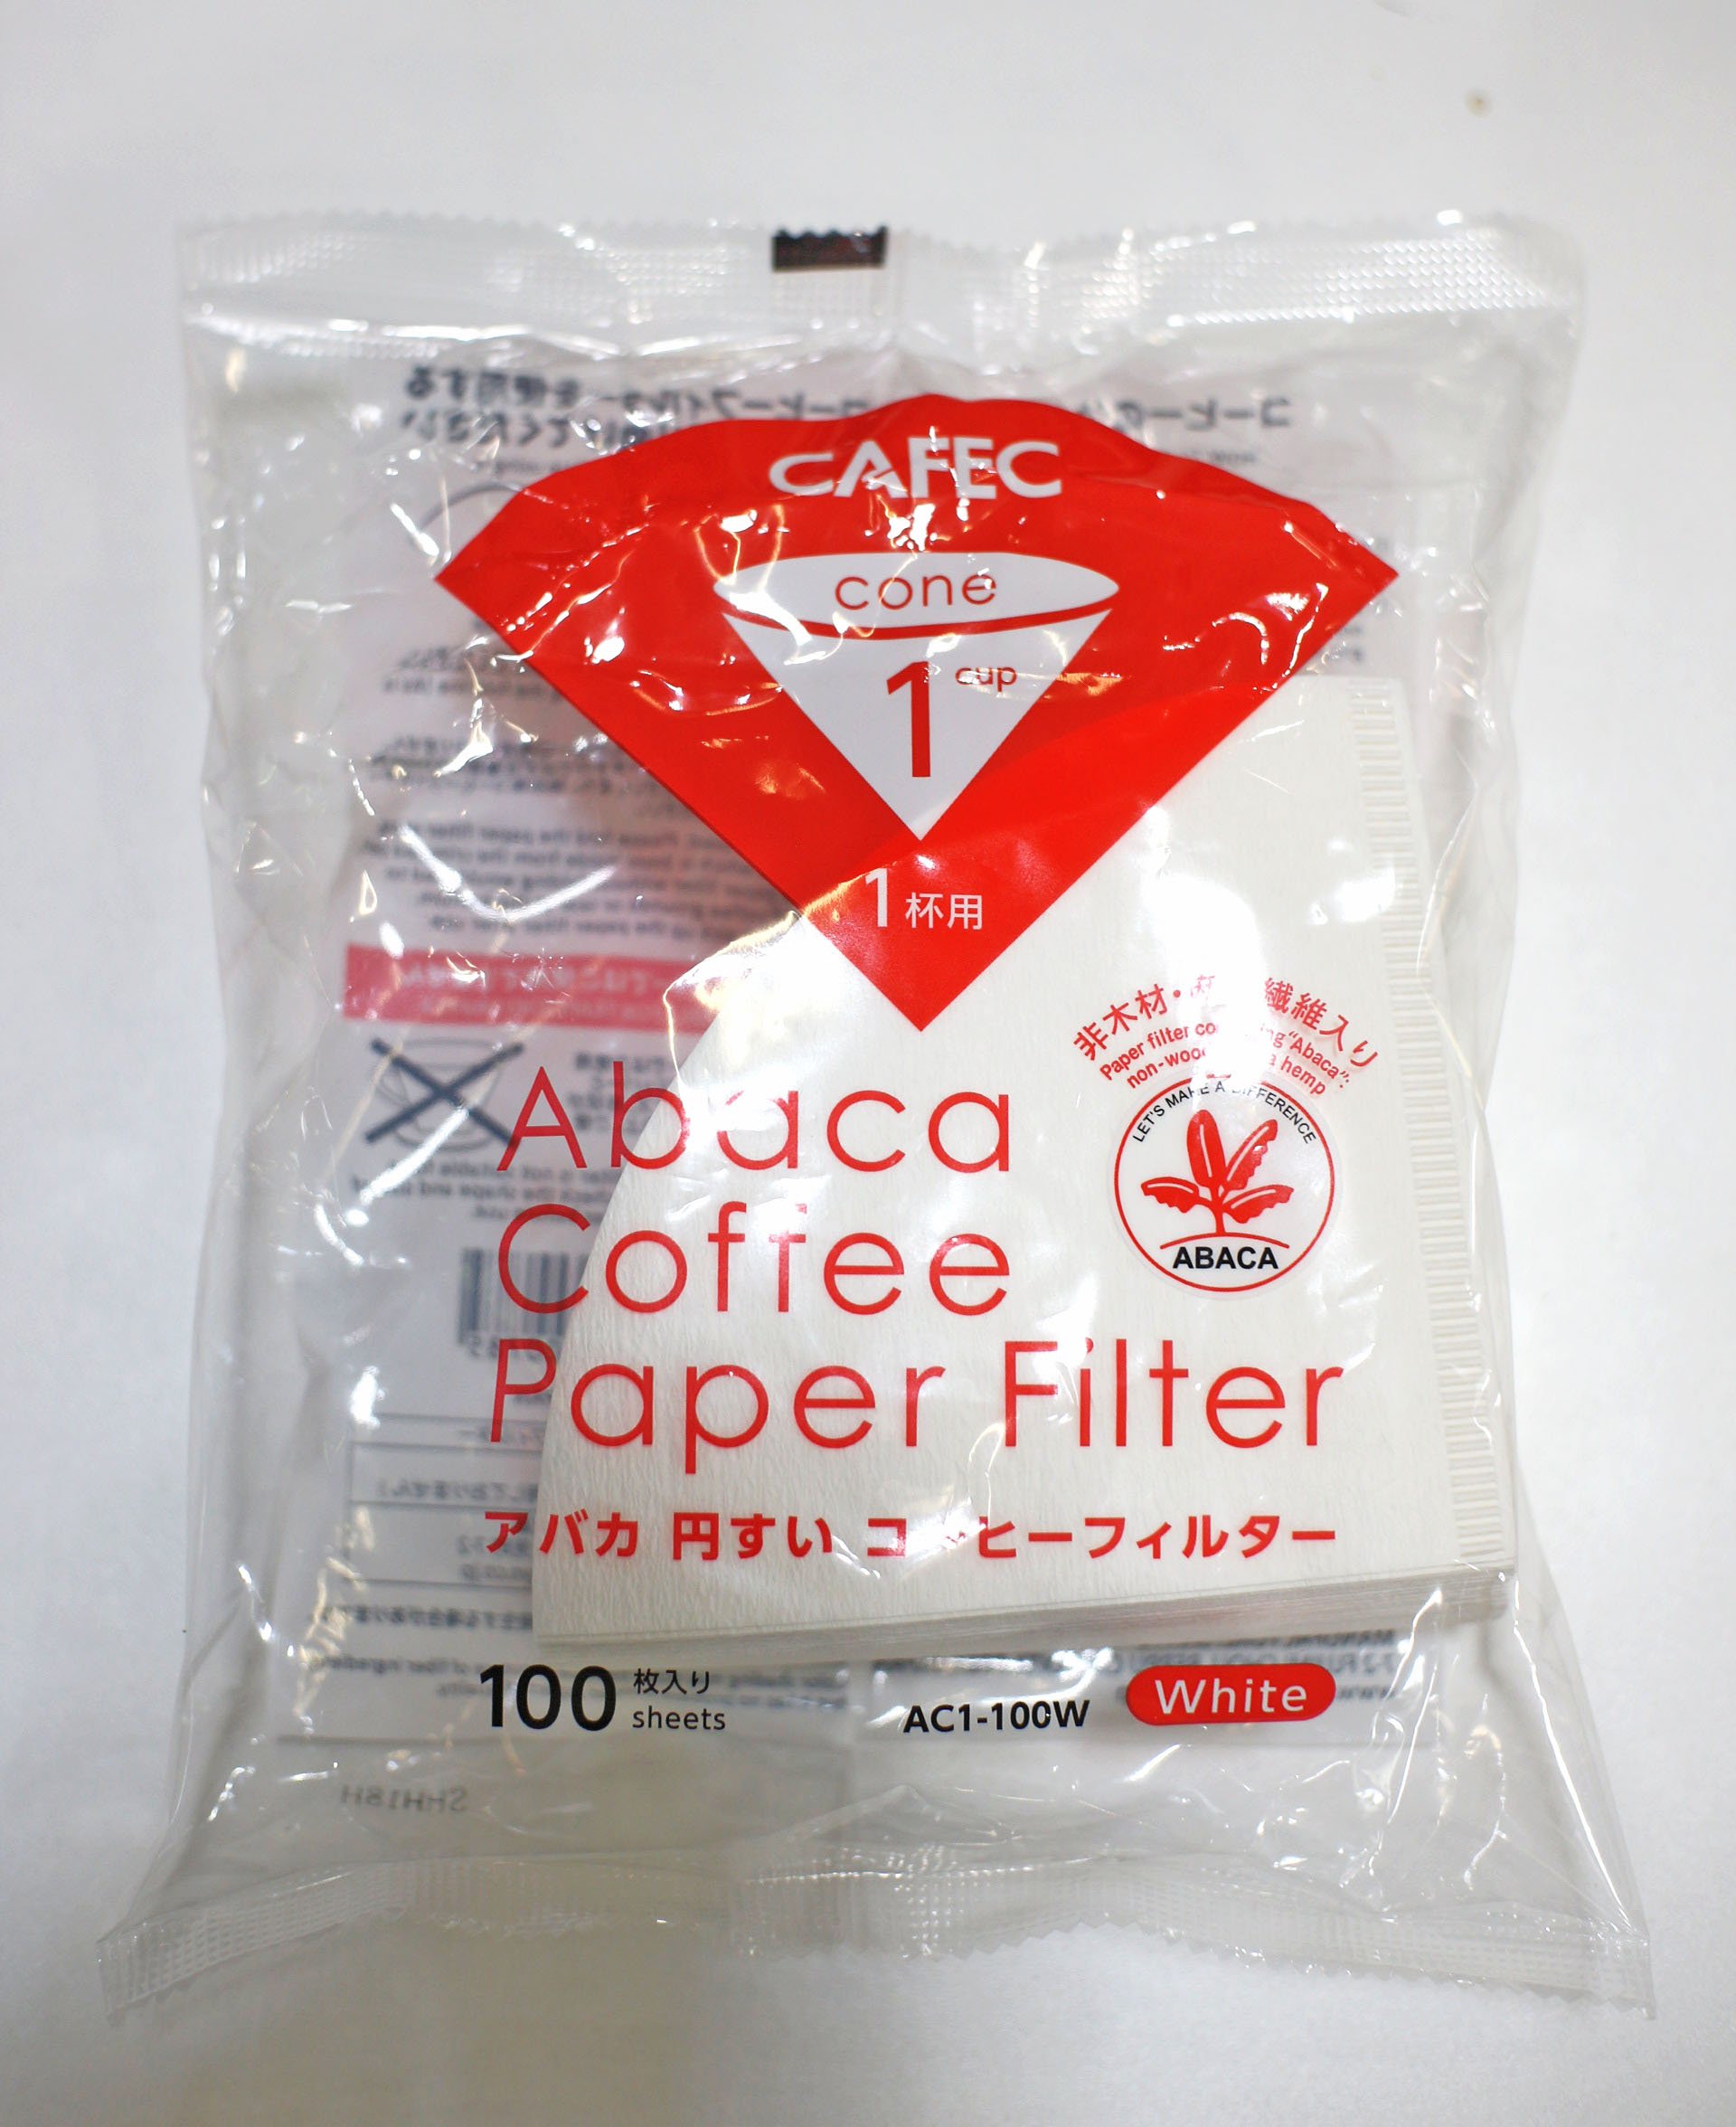 CAFEC Abaca paper Filter ;1 Cup